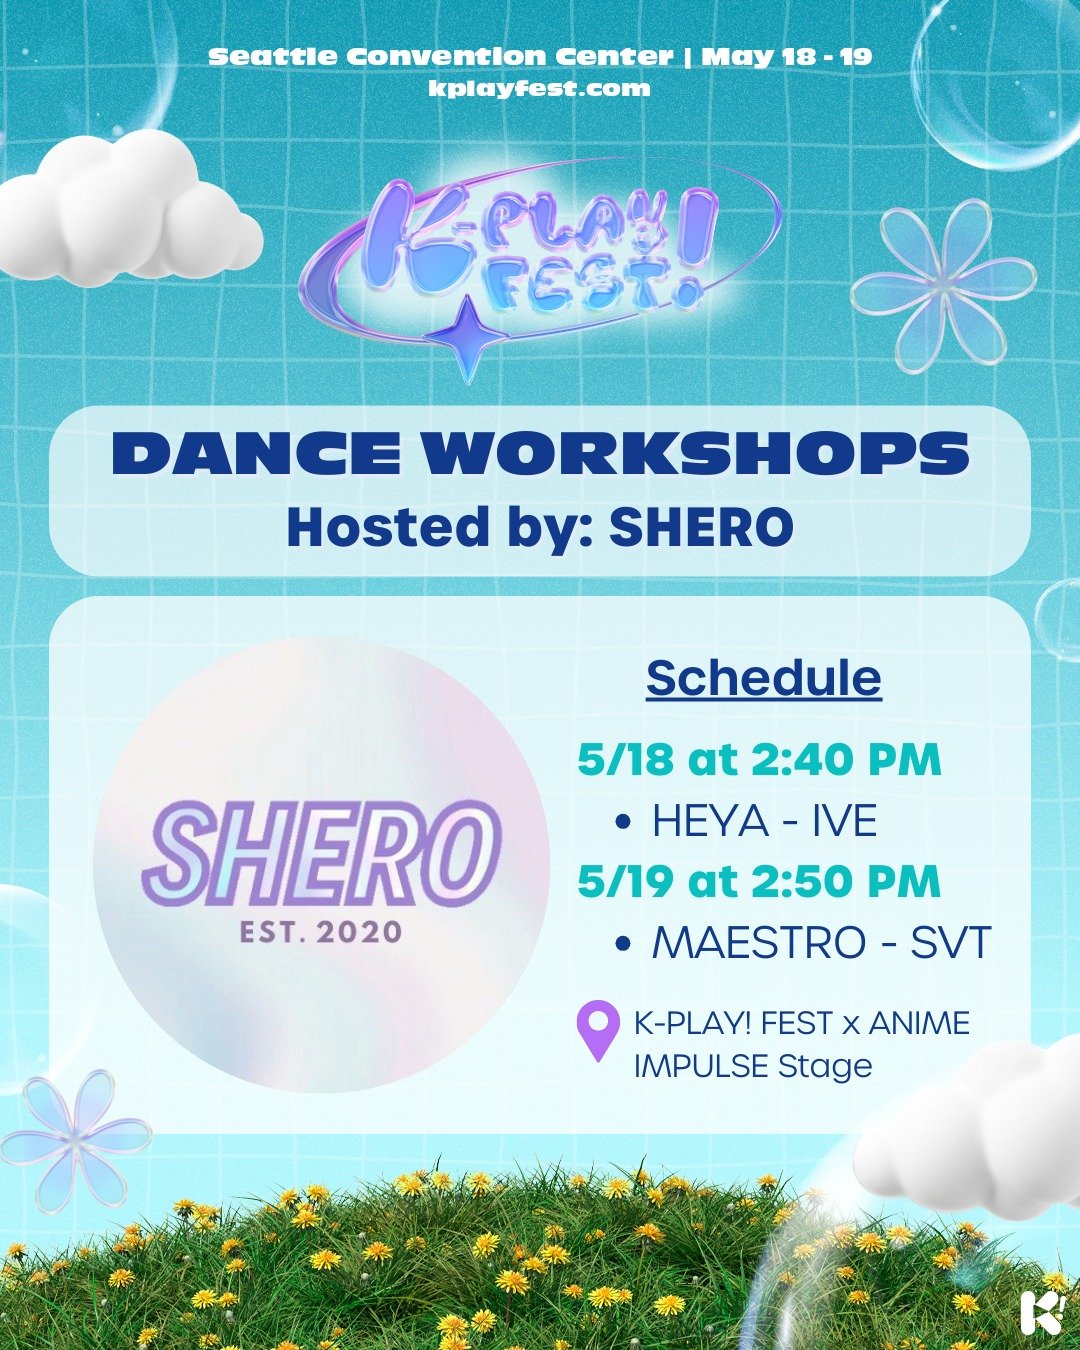 Hey K-PLAYERS! 🗣️ Don&rsquo;t forget to stop by the K-PLAY! FEST x ANIME Impulse Stage to attend DANCE 💃 workshops hosted by @sherofficials ! 🤩 We can&rsquo;t wait to see your moves 🪩

🌟5/18 at 2:40 PM: HEYA - IVE 
🌟5/19 at 2:50 PM: MAESTRO - S